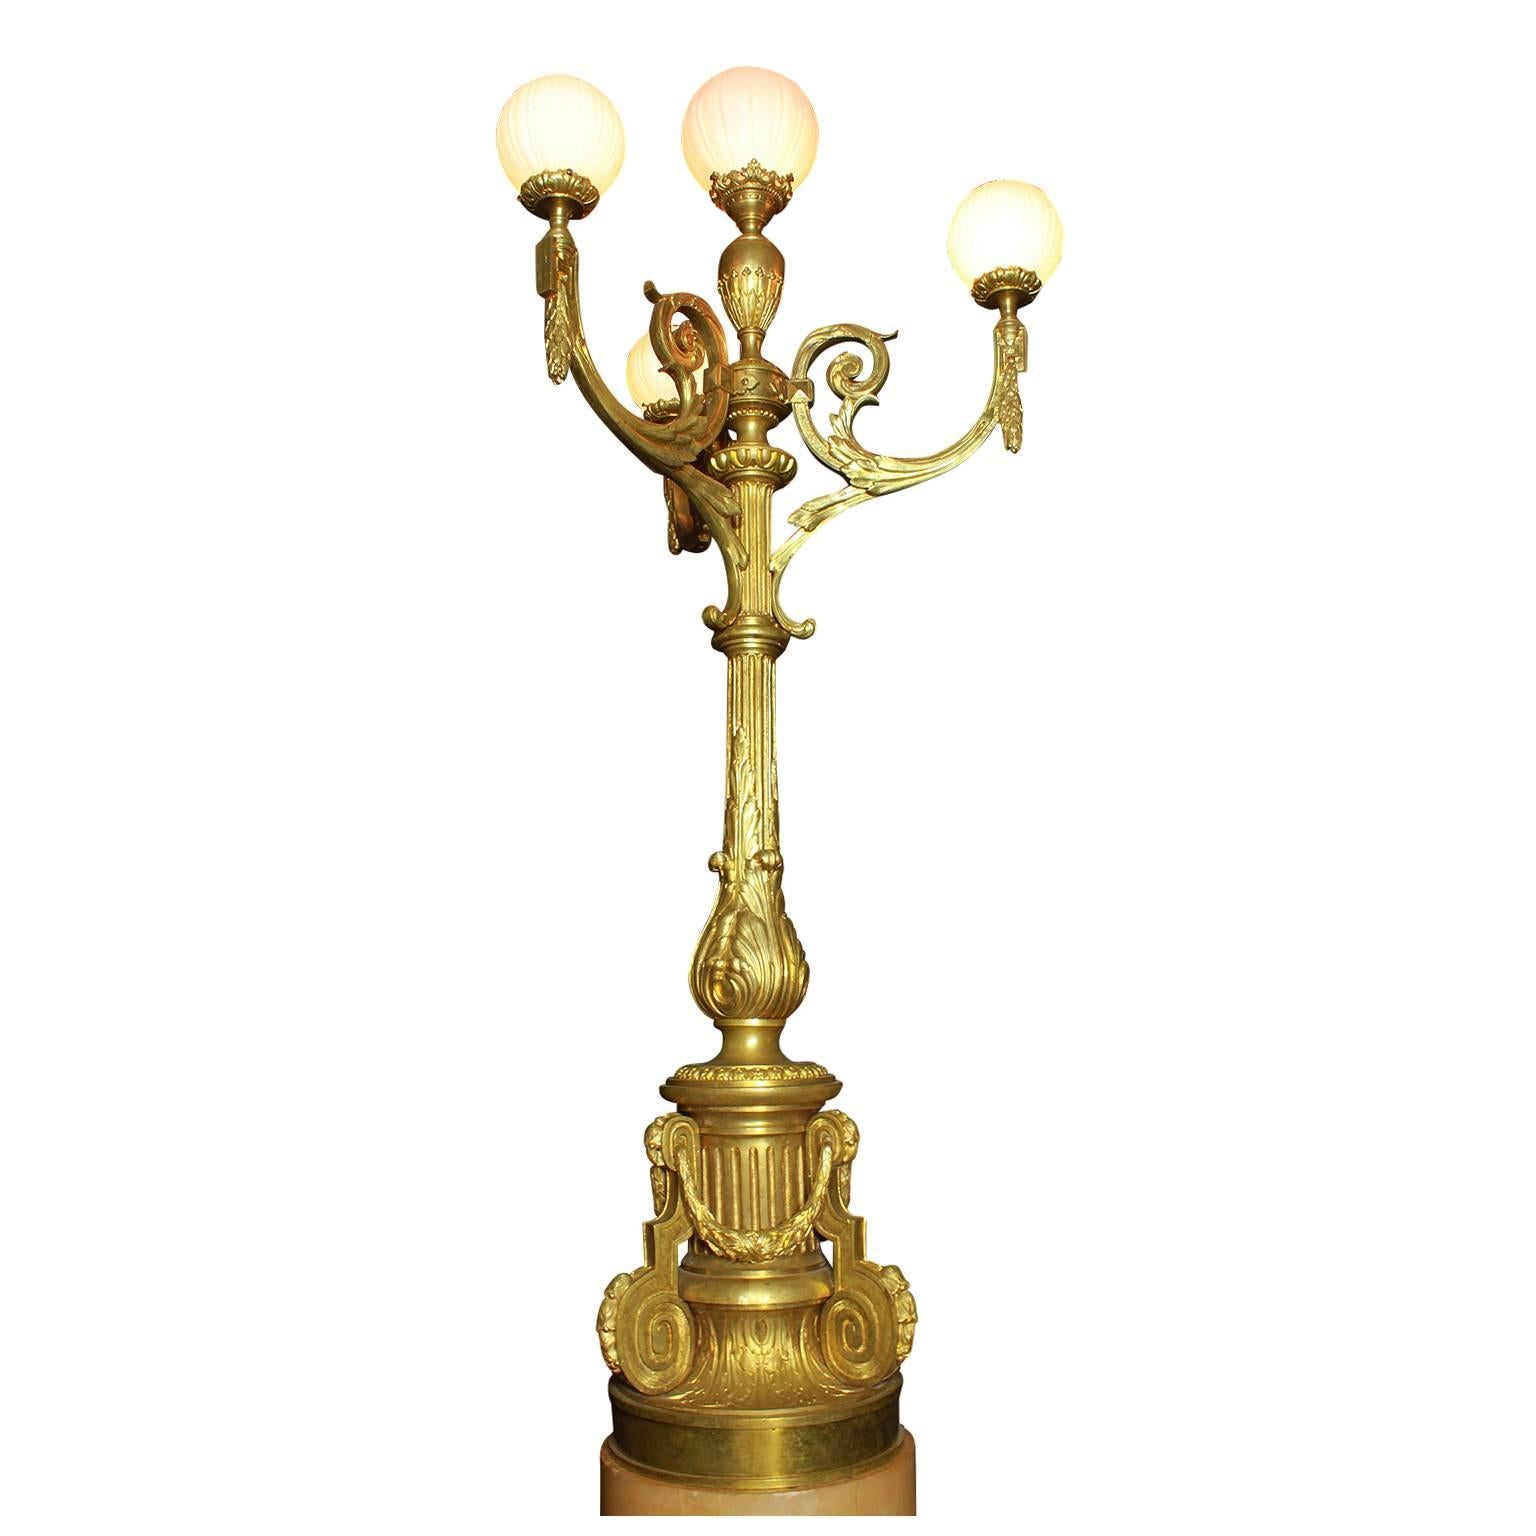 A fine and Large French 19th-20th century Louis XV Style Belle Époque gilt bronze four-light torchère with Laurel Wreaths with white opaline glass globes, raised on a two-tone circular marble pedestal stand, circa 1900, Paris.

Overall height: 99